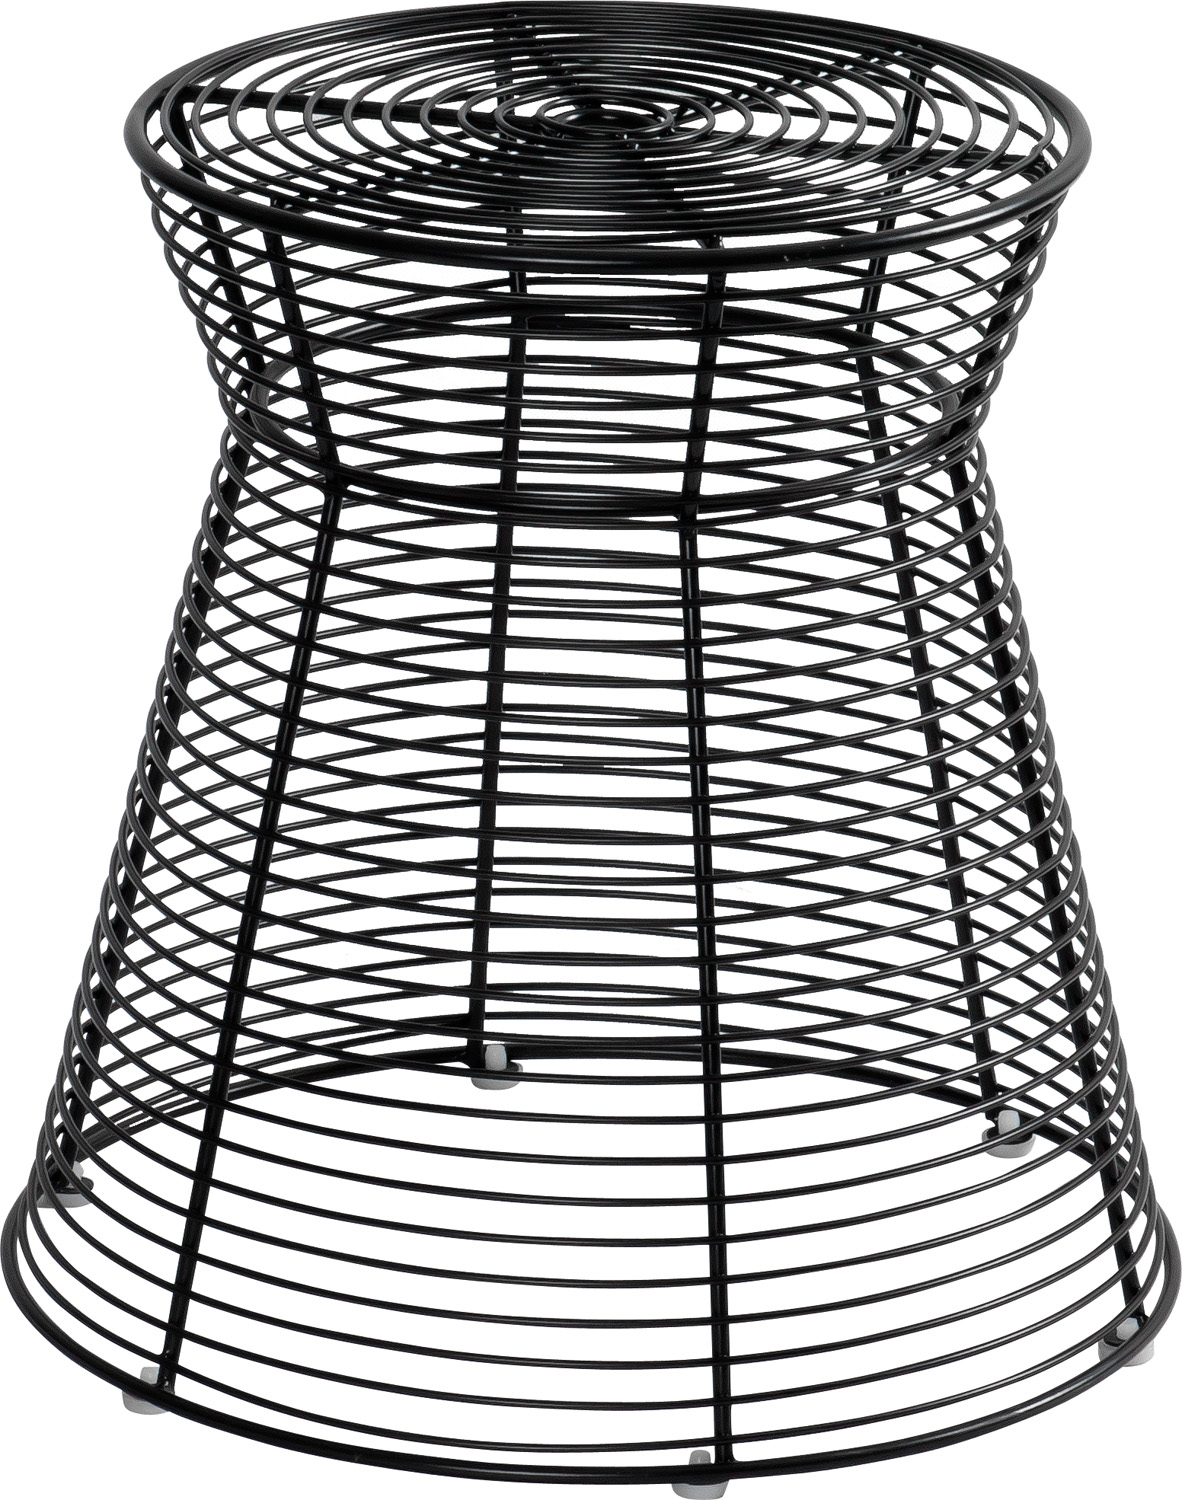 JS-5004 metal wire table